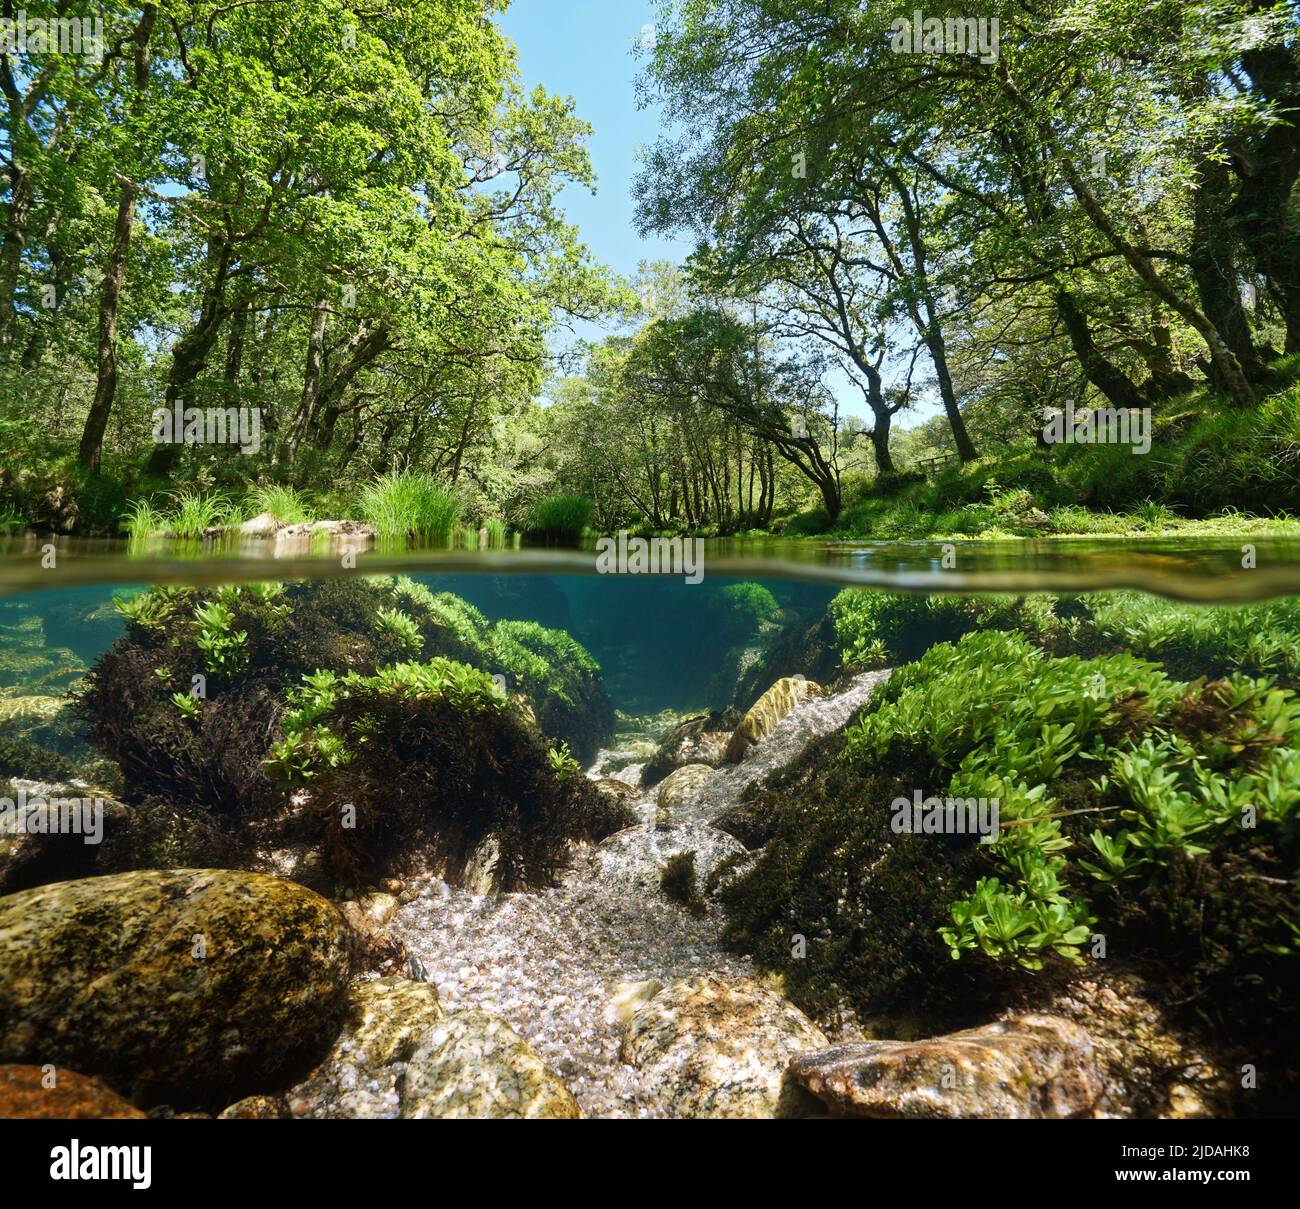 River with green vegetation, split level view over and under water surface, Spain, Galicia, Pontevedra province, Rio Verdugo Stock Photo